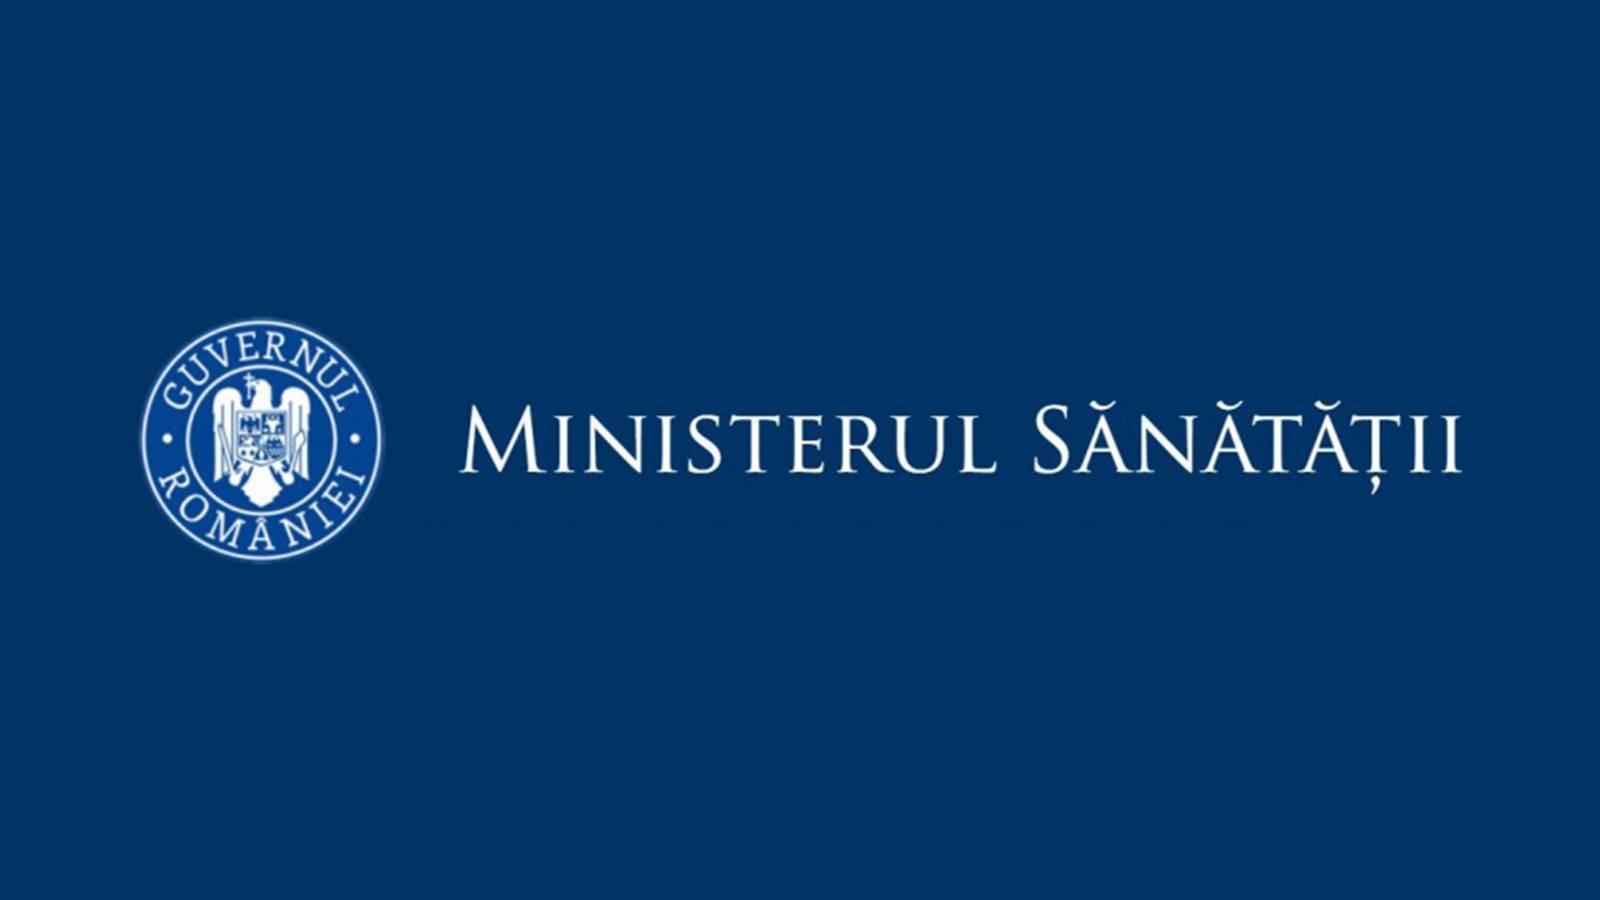 Ministeriet for Indre Sundhed